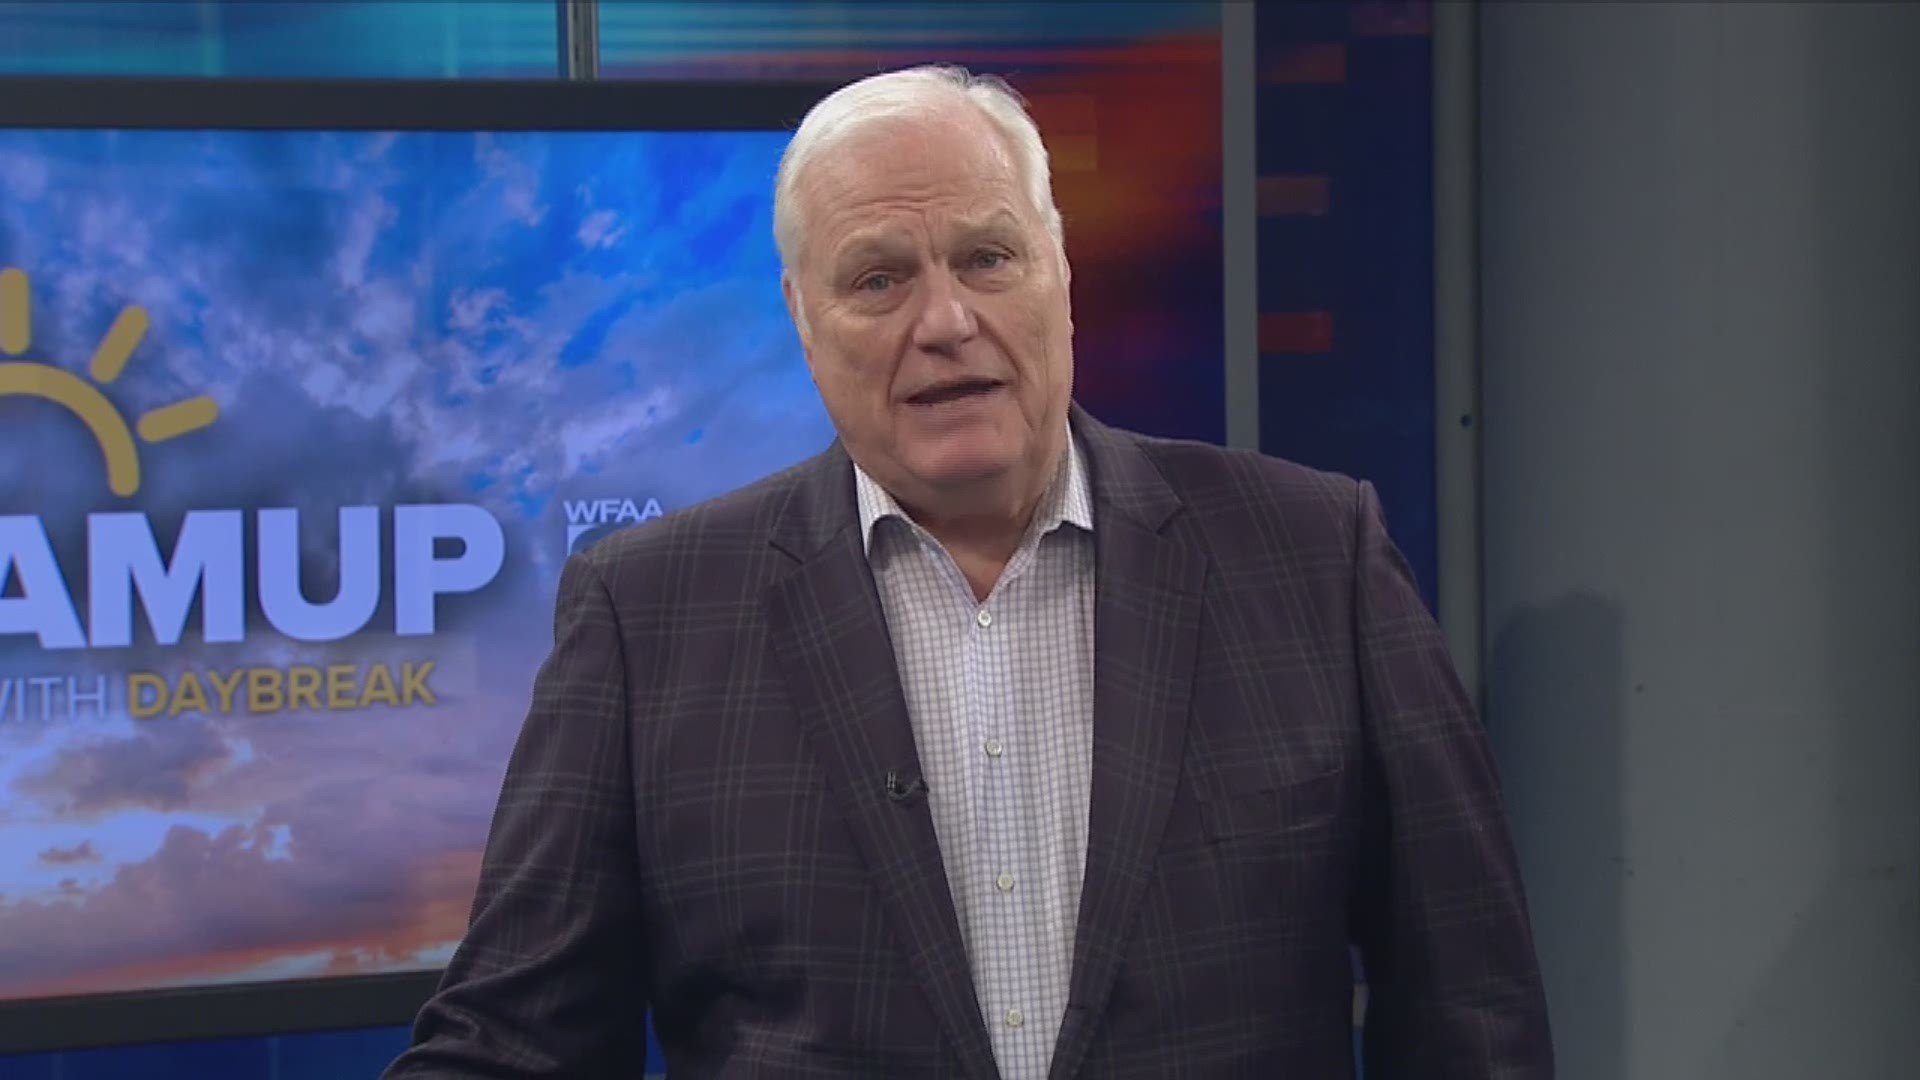 'The news yesterday that the Cleveland Indians are dropping that racist mascot Chief Wahoo got me thinking again...What took so long? And why aren't they making the change until next year?'-Dale Hansen